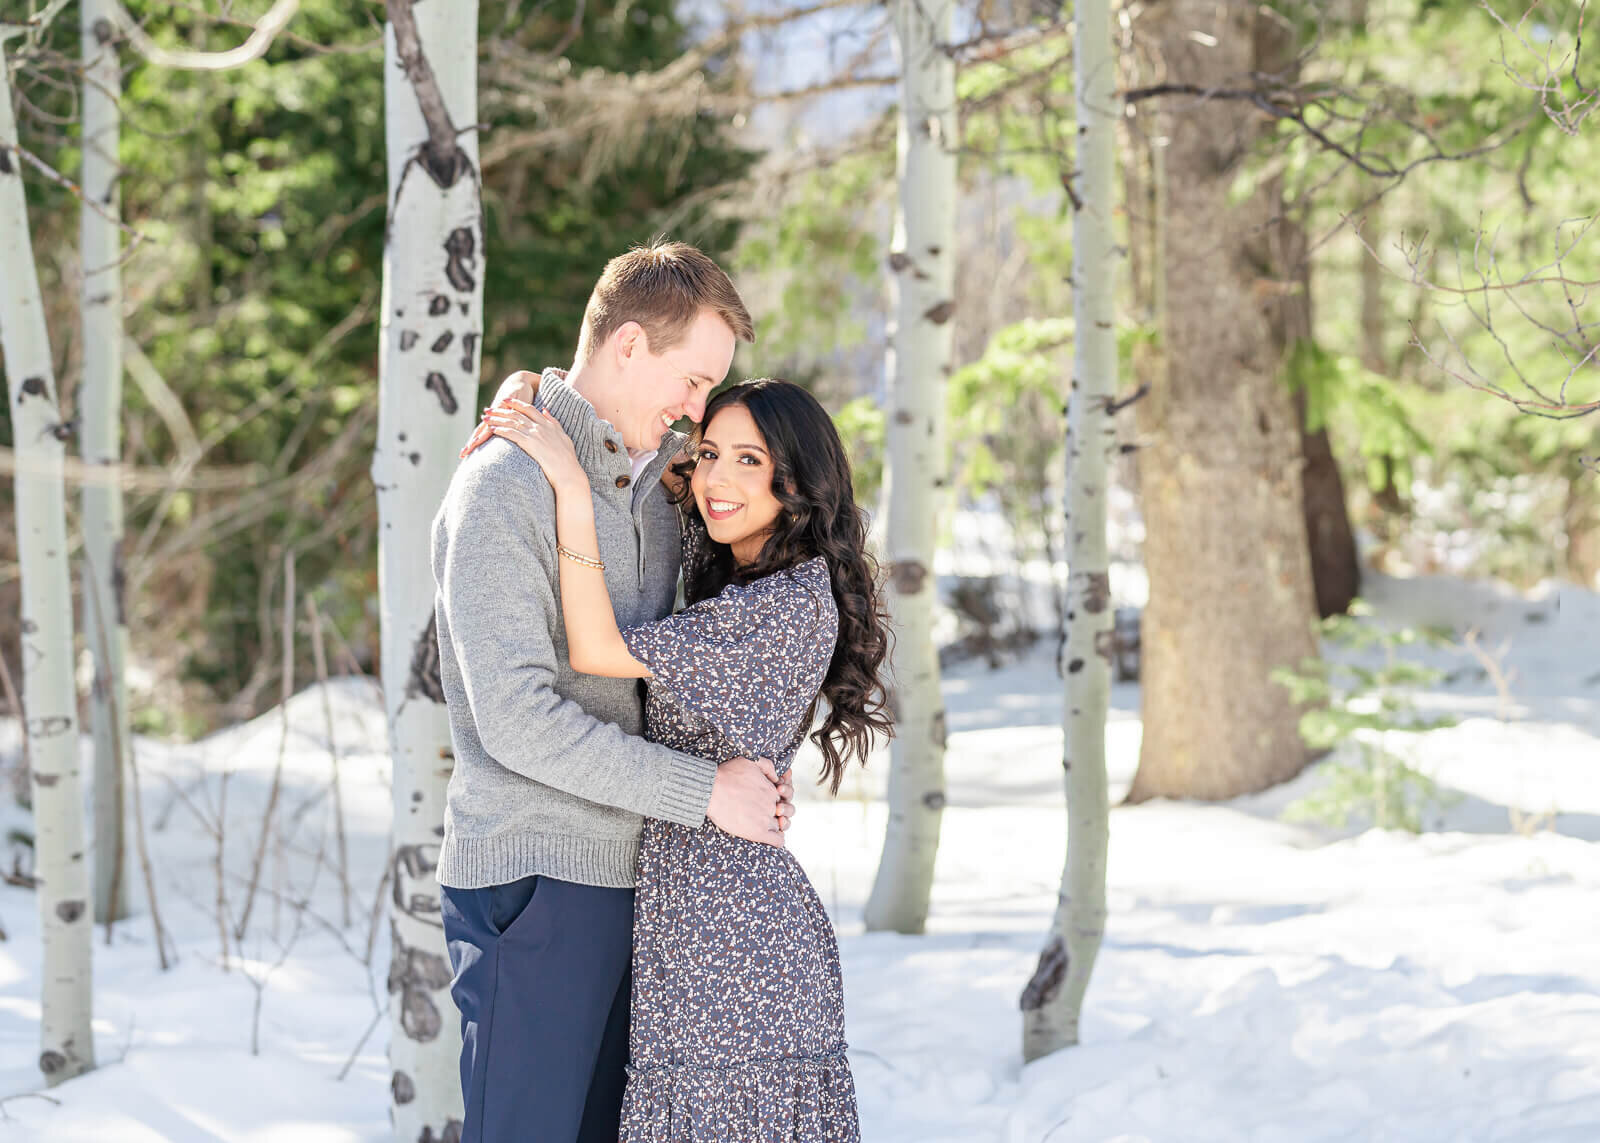 An engaged couple holding each other in the snow with light shining through the trees at Aspen Grove, Provo. Captured by Utah engagement photographer Melissa Woodruff Photography